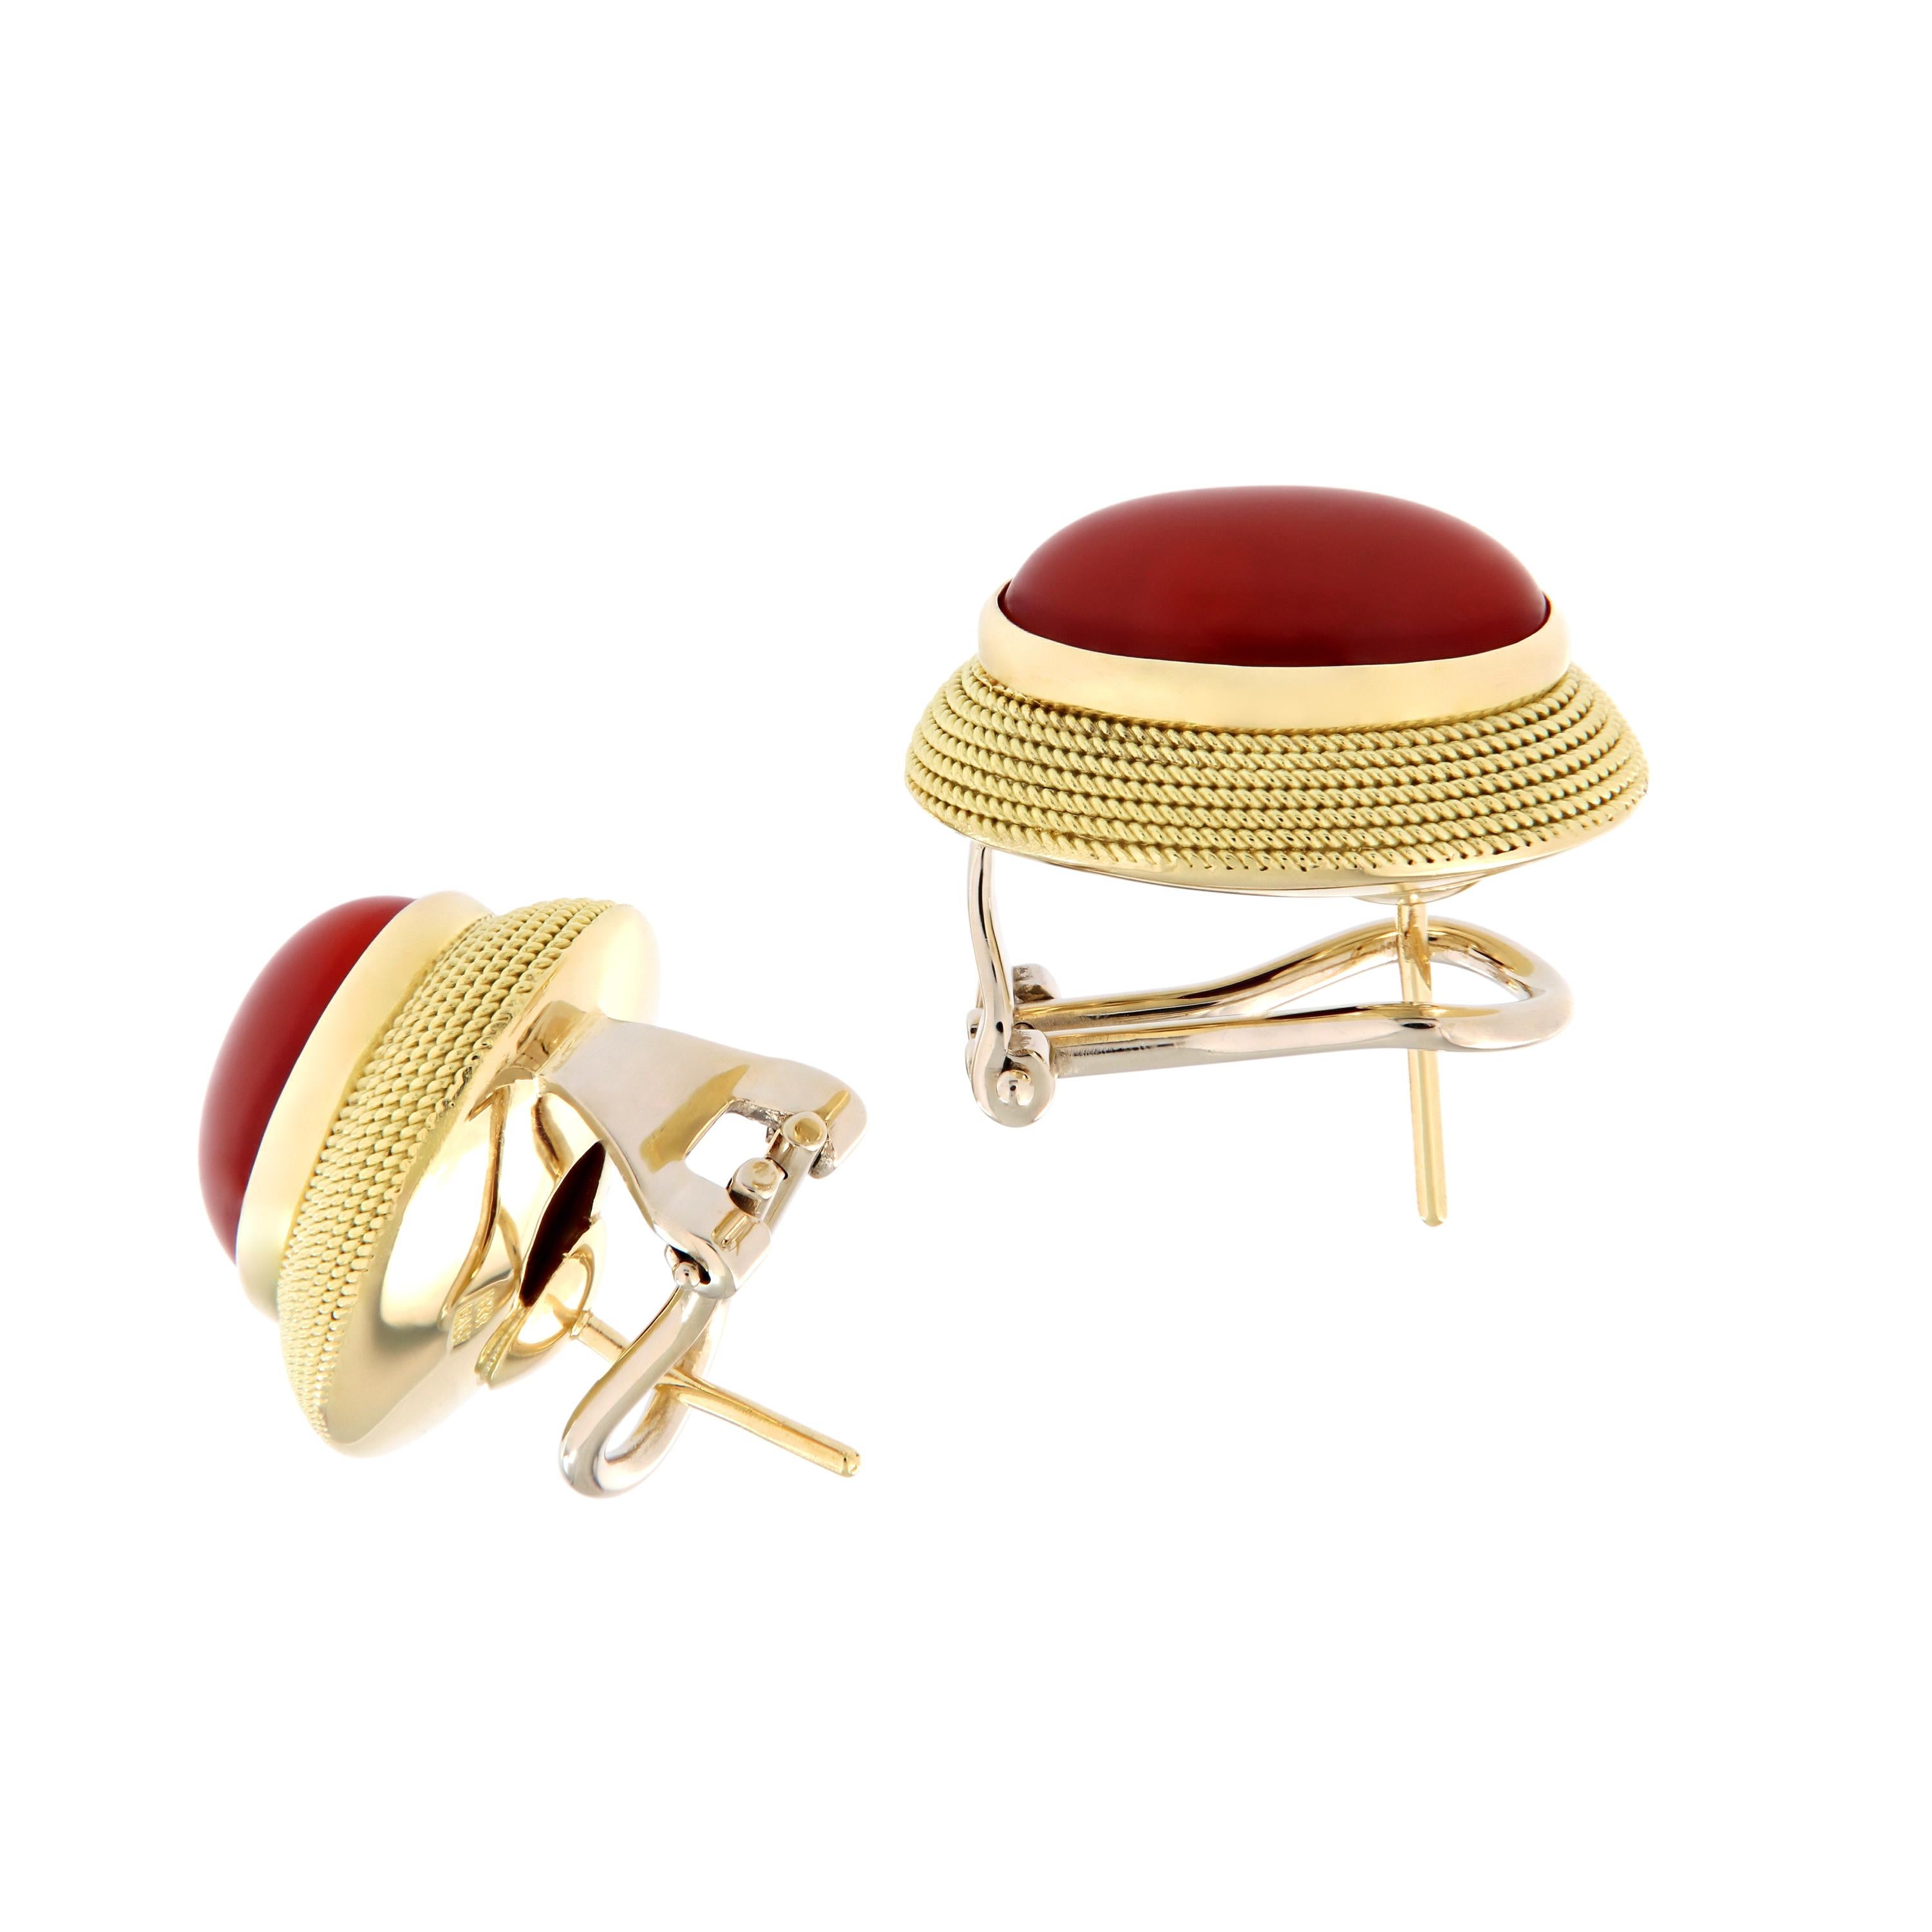 Oval cabochon red coral framed with a polished rope design are handcrafted in 18k yellow gold. The stud earrings have omega backs. Earrings measure 15mm x 19mm. Weigh 12 grams.

Coral measures 9mm x 13mm.